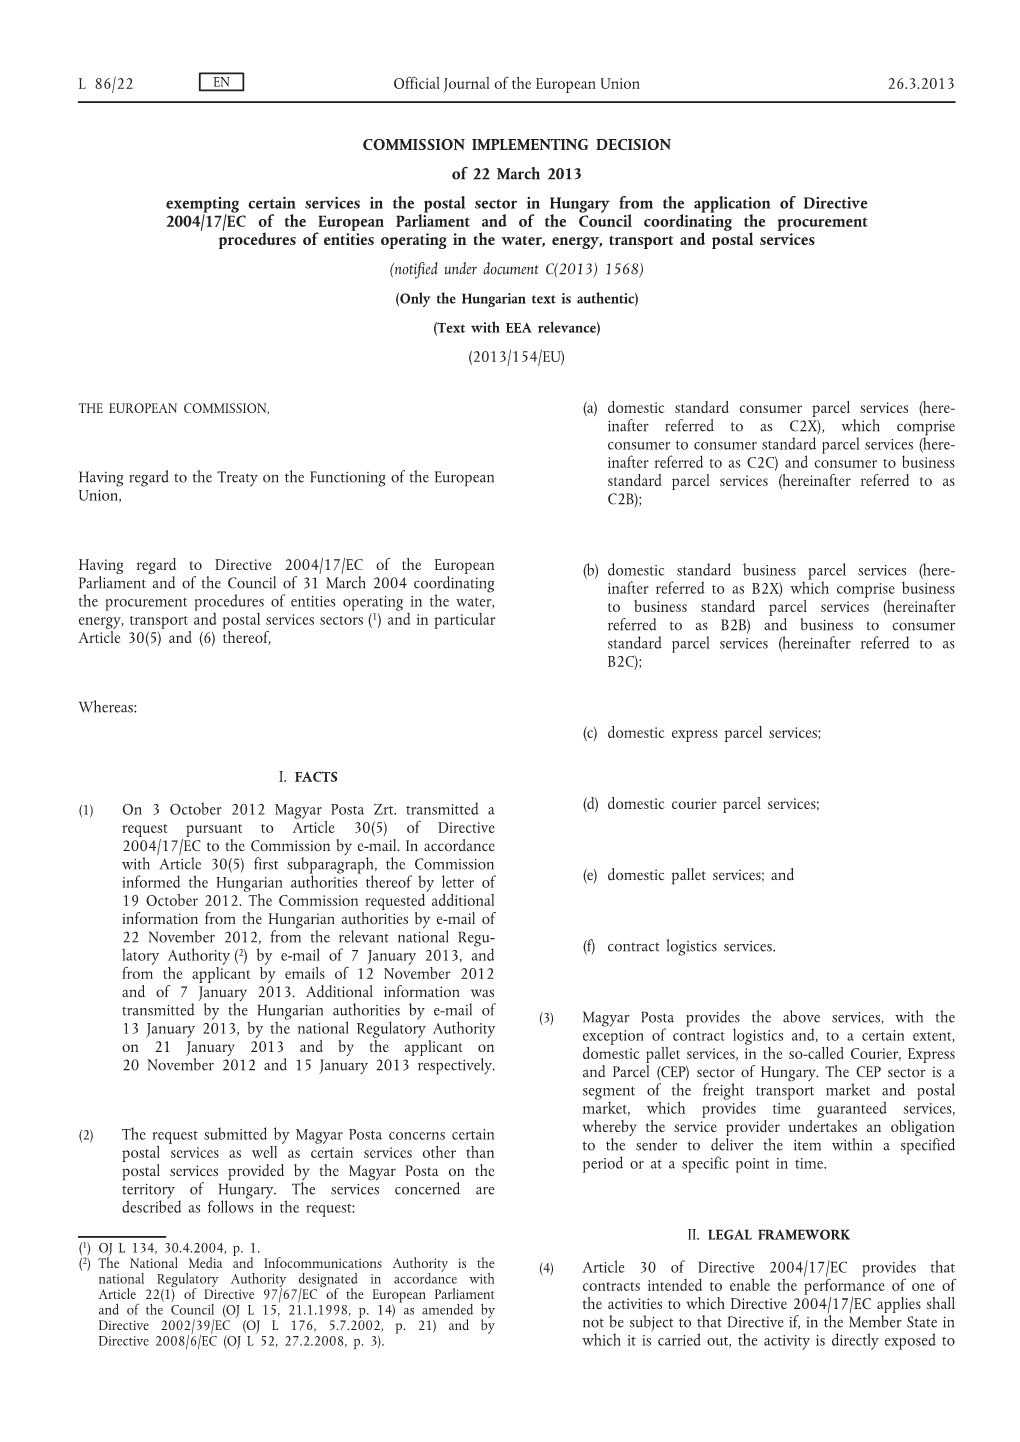 Commission Implementing Decision of 22 March 2013 Exempting Certain Services in the Postal Sector in Hungary from the Applicatio